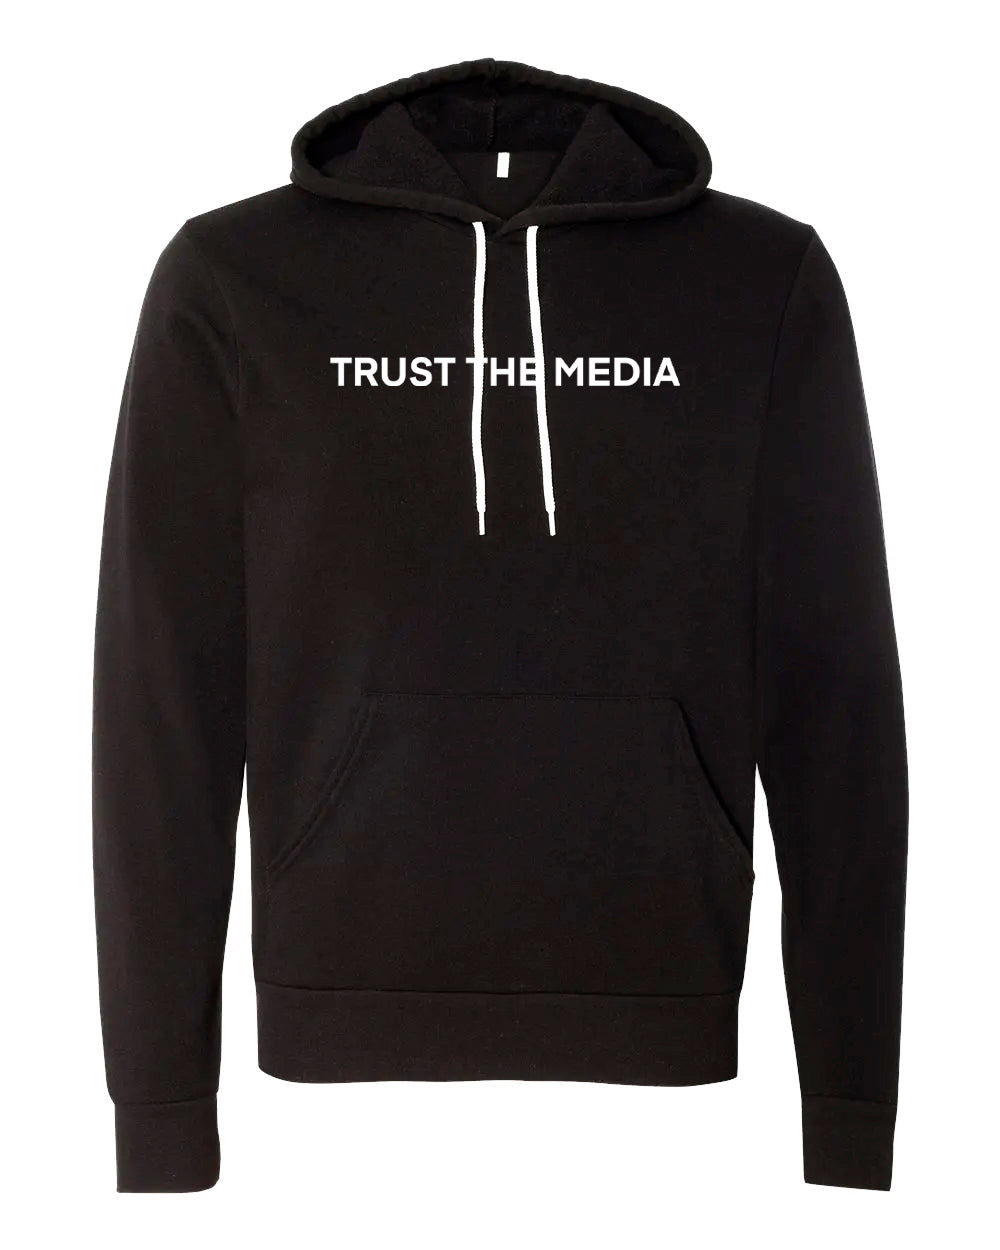 TRUST THE MEDIA Hoodie | Unsettled Apparel